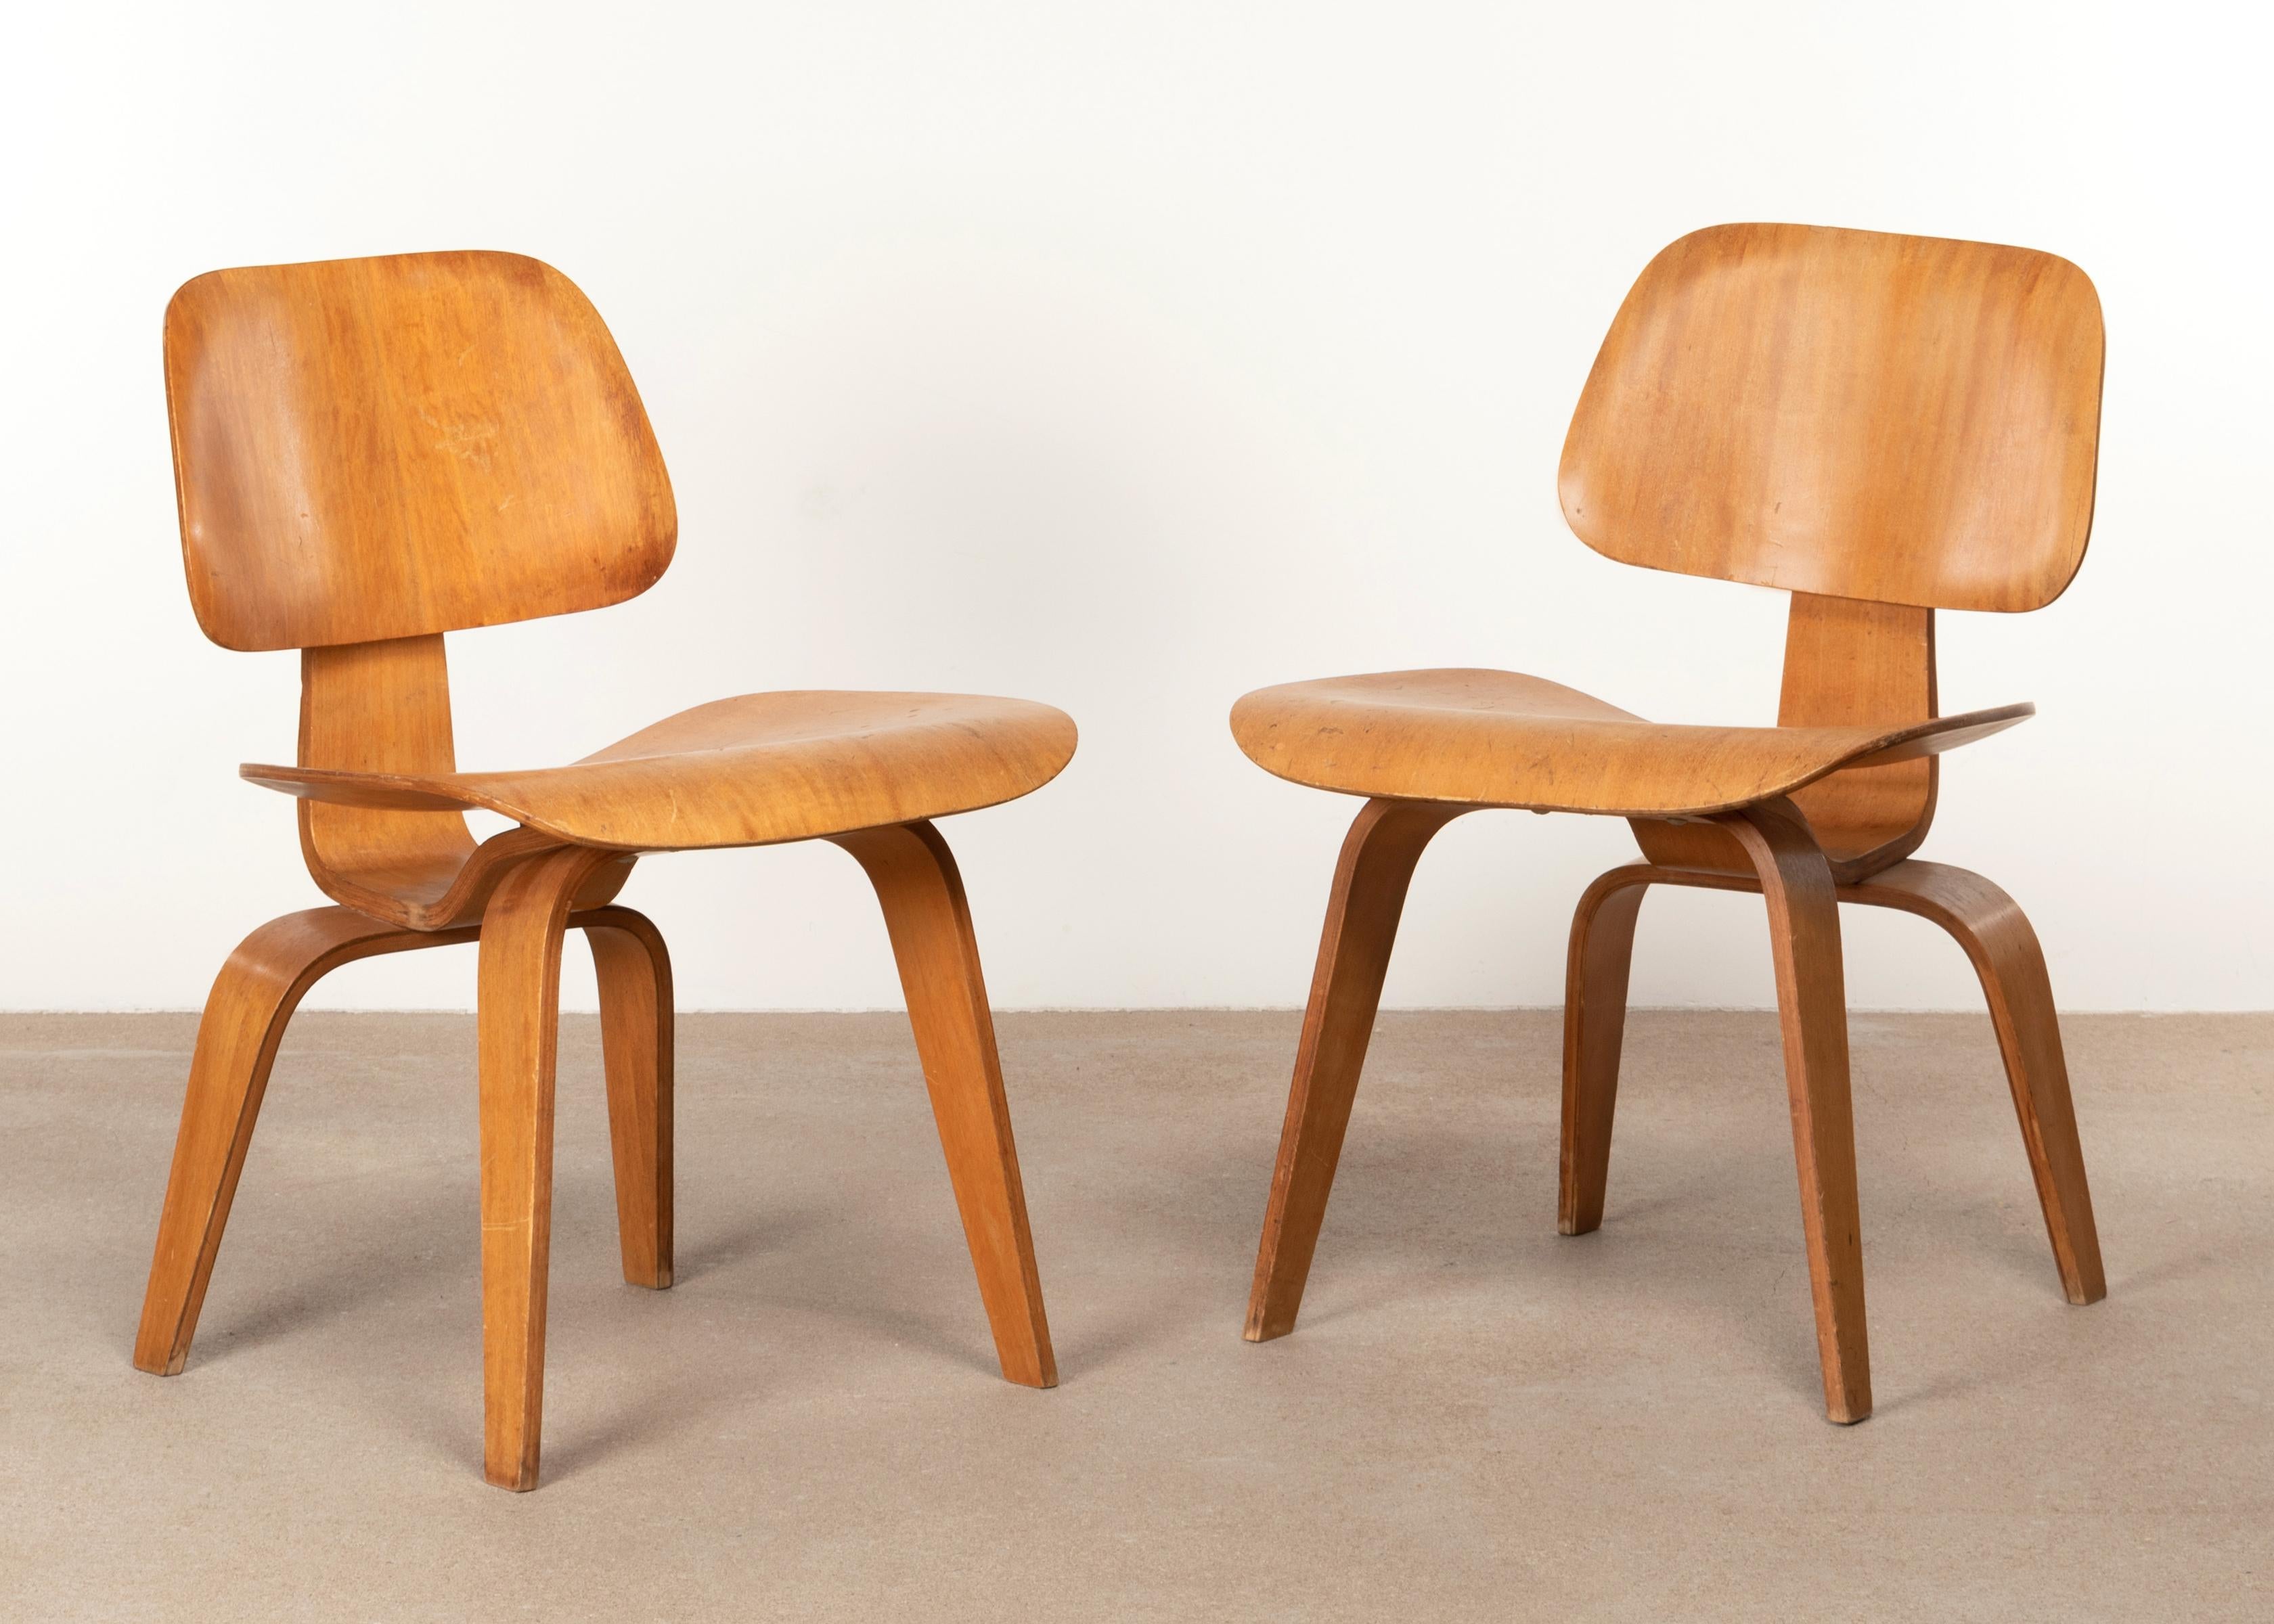 Iconic DCW dining chairs in plywood. The mahogany veneer is in good condition with patina and normal wear. Early Evans Products / Herman Miller from 1945 (5-2-5 screw configuration). Signed with manufacturer's label underside: ‘Herman Miller Evans